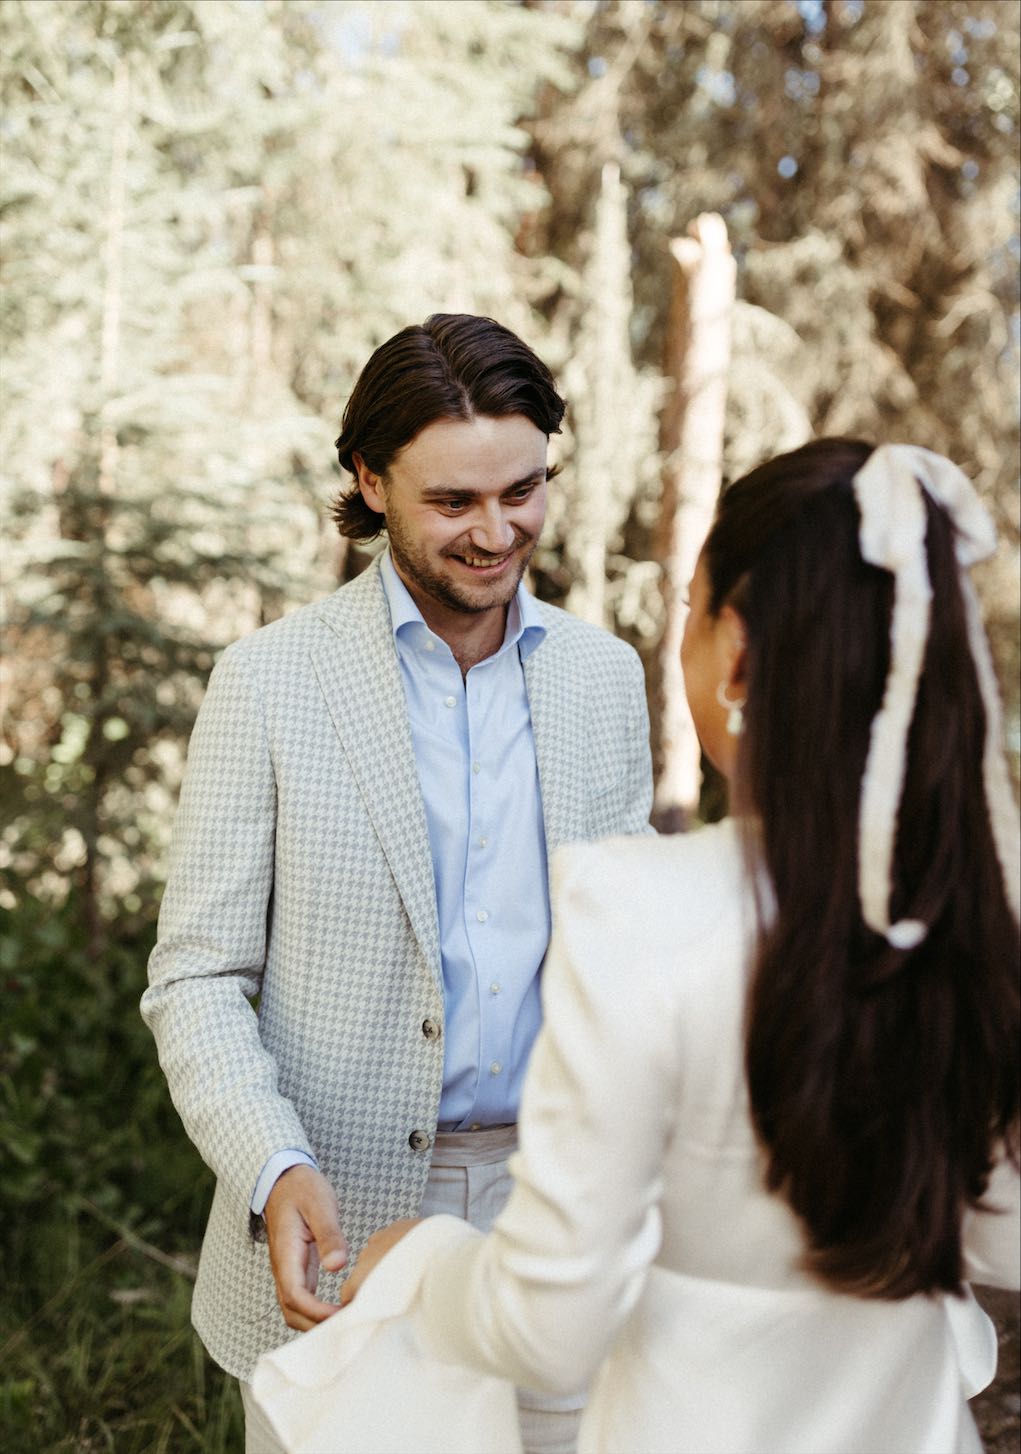 Groom smiling as he looks at his soon to be wife